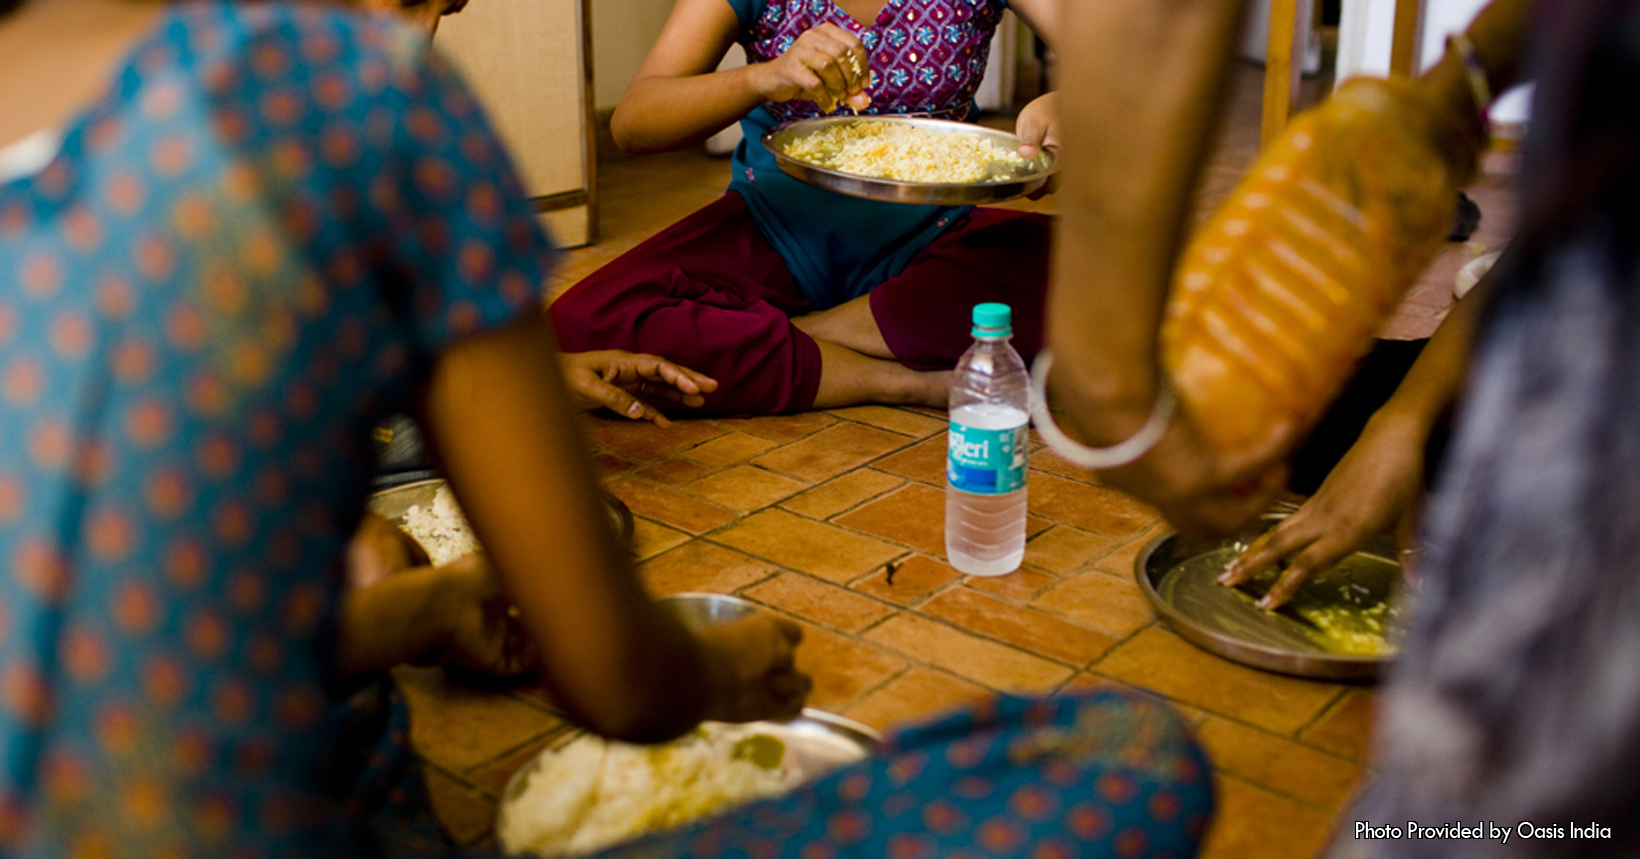 Captured by Tianna, this photo shows a group of 4 girls sitting down on a tiled floor enjoying a meal together. The girls are either survivors or at risk of human trafficking. One way Oasis India helps these young women is by providing housing for them. Although the housing provides the girls with shelter and education, they still need to keep the house in order. The girls living in the house are tasked with a variety of chores to maintain the house. One of these chores is cooking, and the food the girls are eating is a result of them cooking for themselves. On the left side of the photo is one of the girls who is eating her portion of the meal. She is wearing a blue outfit that has a multiple orange spots scattered throughout. To her left is another one of the 4 girls. She to like the rest of the girls is beginning to enjoy her meal. Sitting in the back of the photo is another young girl. With her plate being held in her left hand, she is using her right hand to grab the food off the plate to eat. This young girl is wearing a short sleeved shirt where the front is purple with a patterned design. She is also wearing long pants that are maroon in color. To her left and on the right side of the photo is the last young woman. Unlike the rest of the girls she is sitting with, she is almost down with her food. In the center of the photo, and in the center of the 4 girls is a water bottle. Lastly on the right side of the picture is a man in a black shirt that is holding a container that contains some food for the young girls.